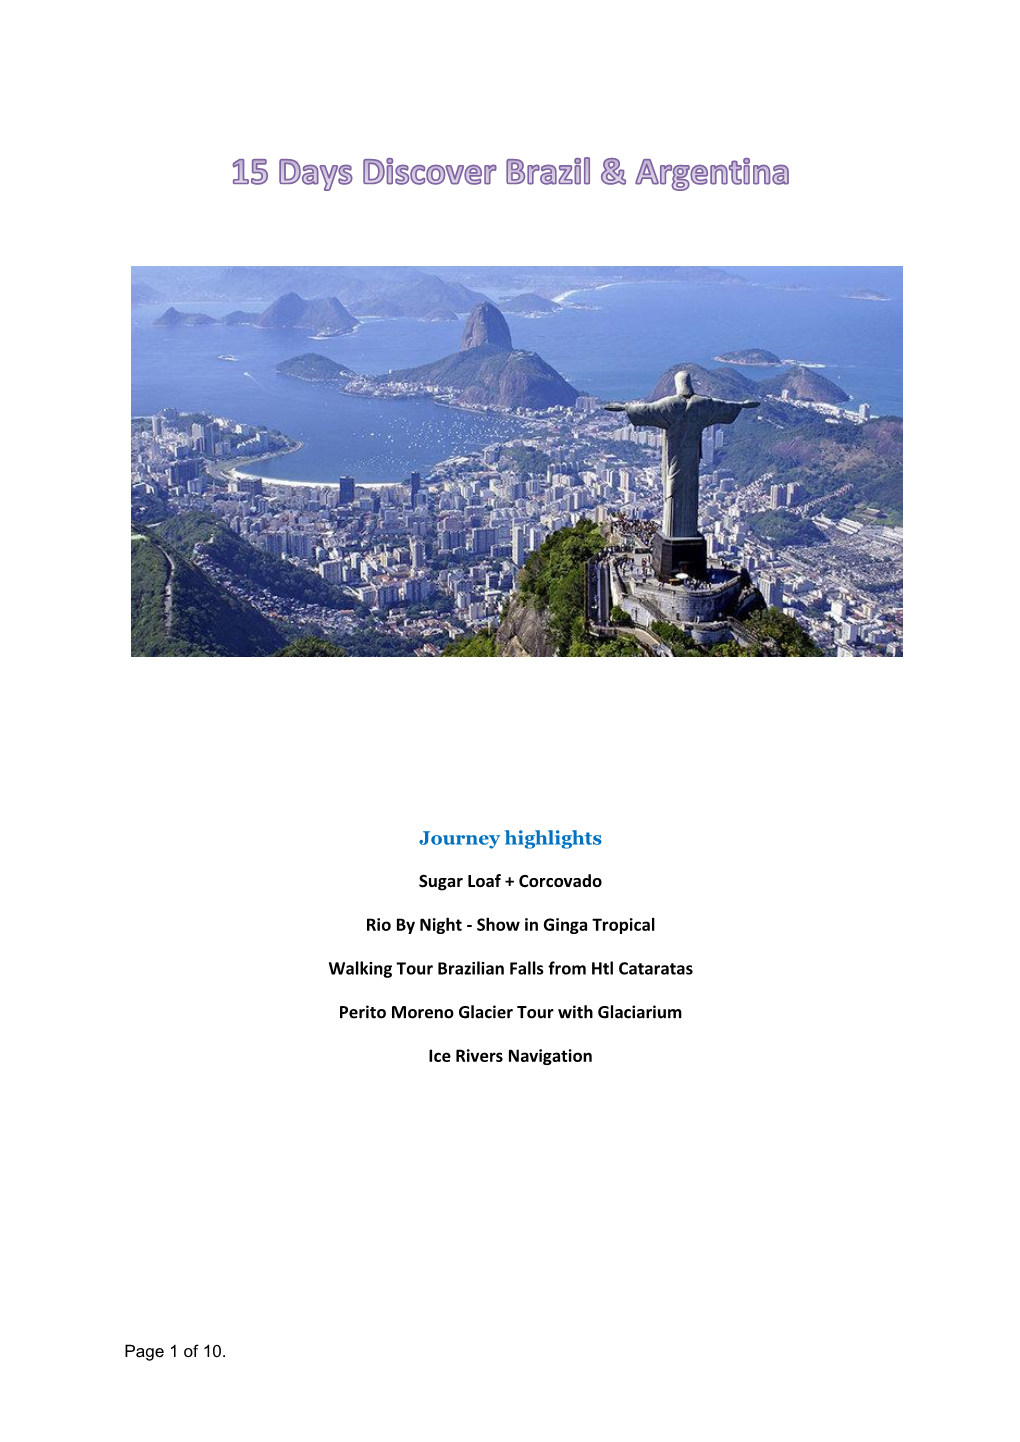 Journey Highlights Sugar Loaf + Corcovado Rio by Night